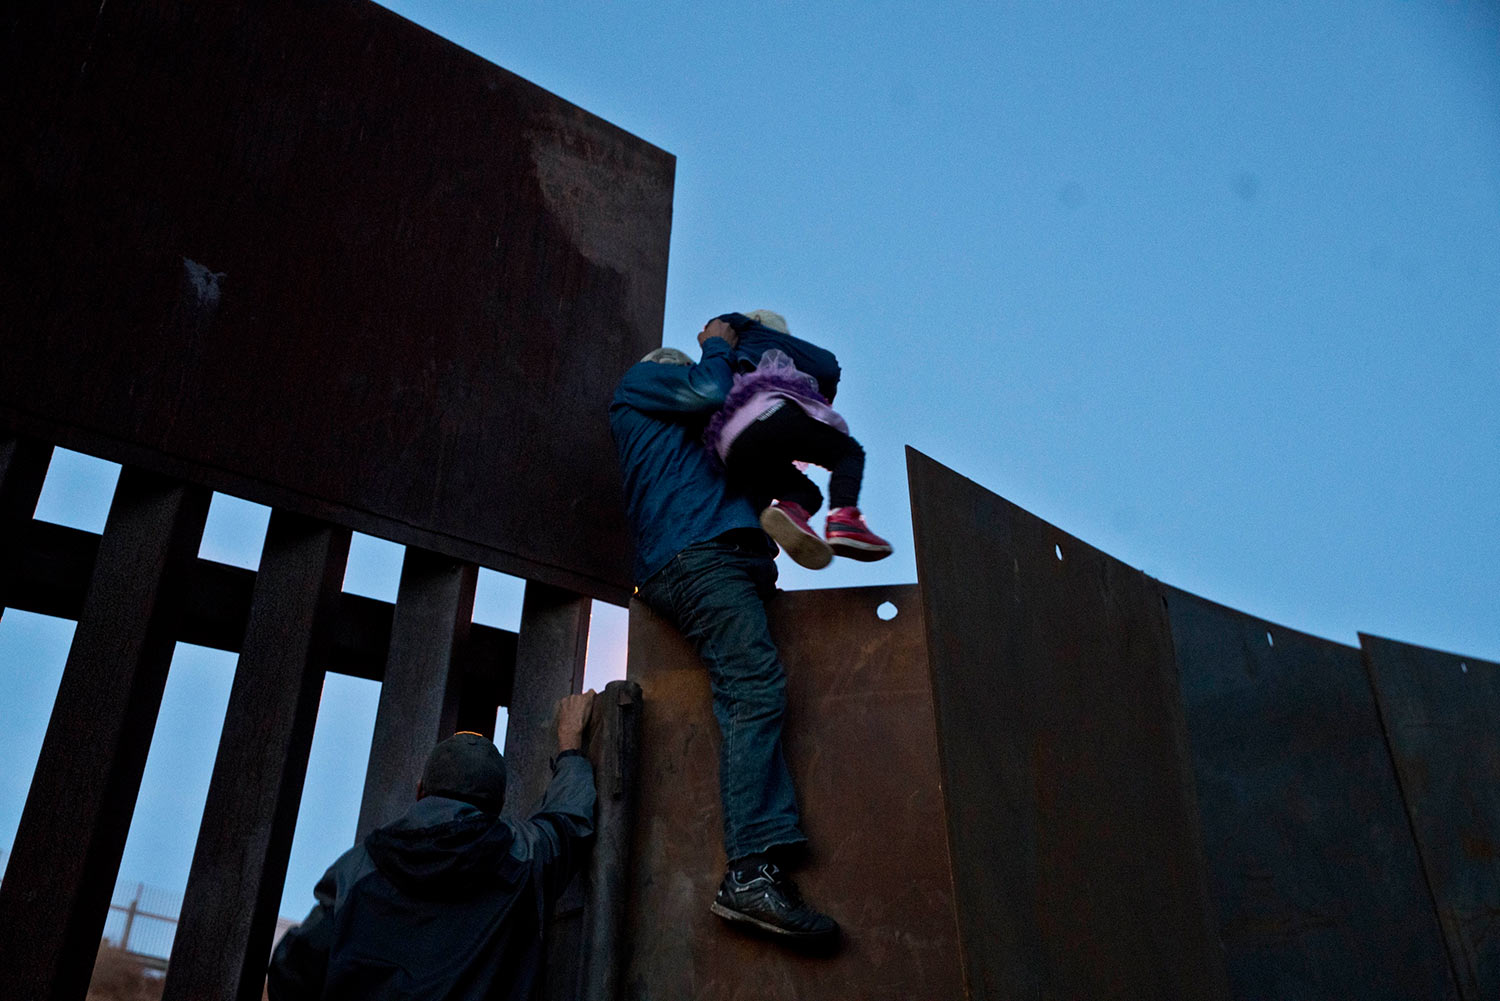  A Honduran migrant helps a young girl cross to the American side of the border wall, in Tijuana, Mexico, Sunday, Dec. 2, 2018. (AP Photo/Ramon Espinosa) 